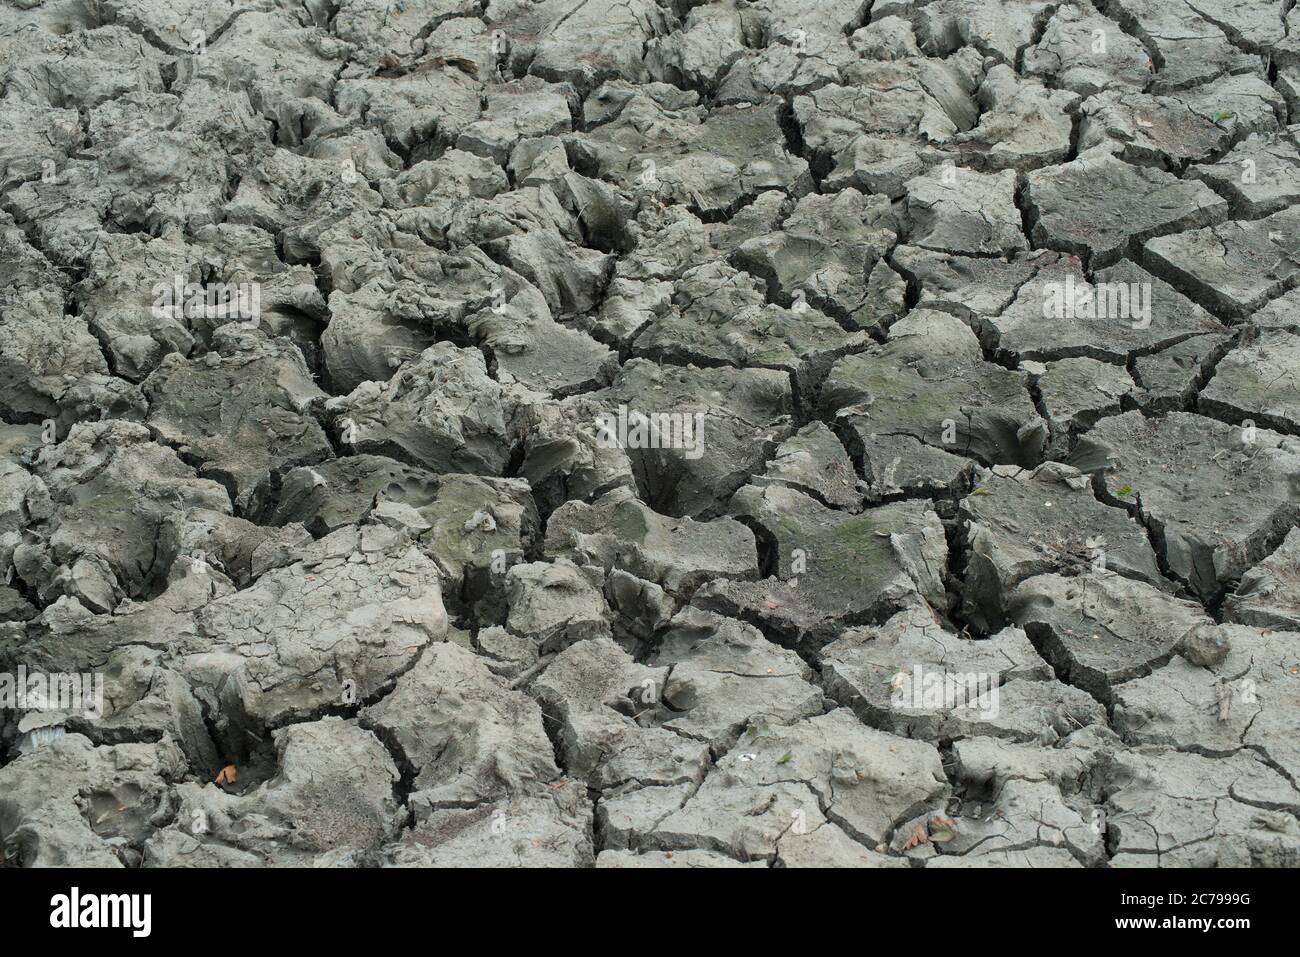 Soil and earth dried out and cracked into various shapes by prolonged heat Stock Photo